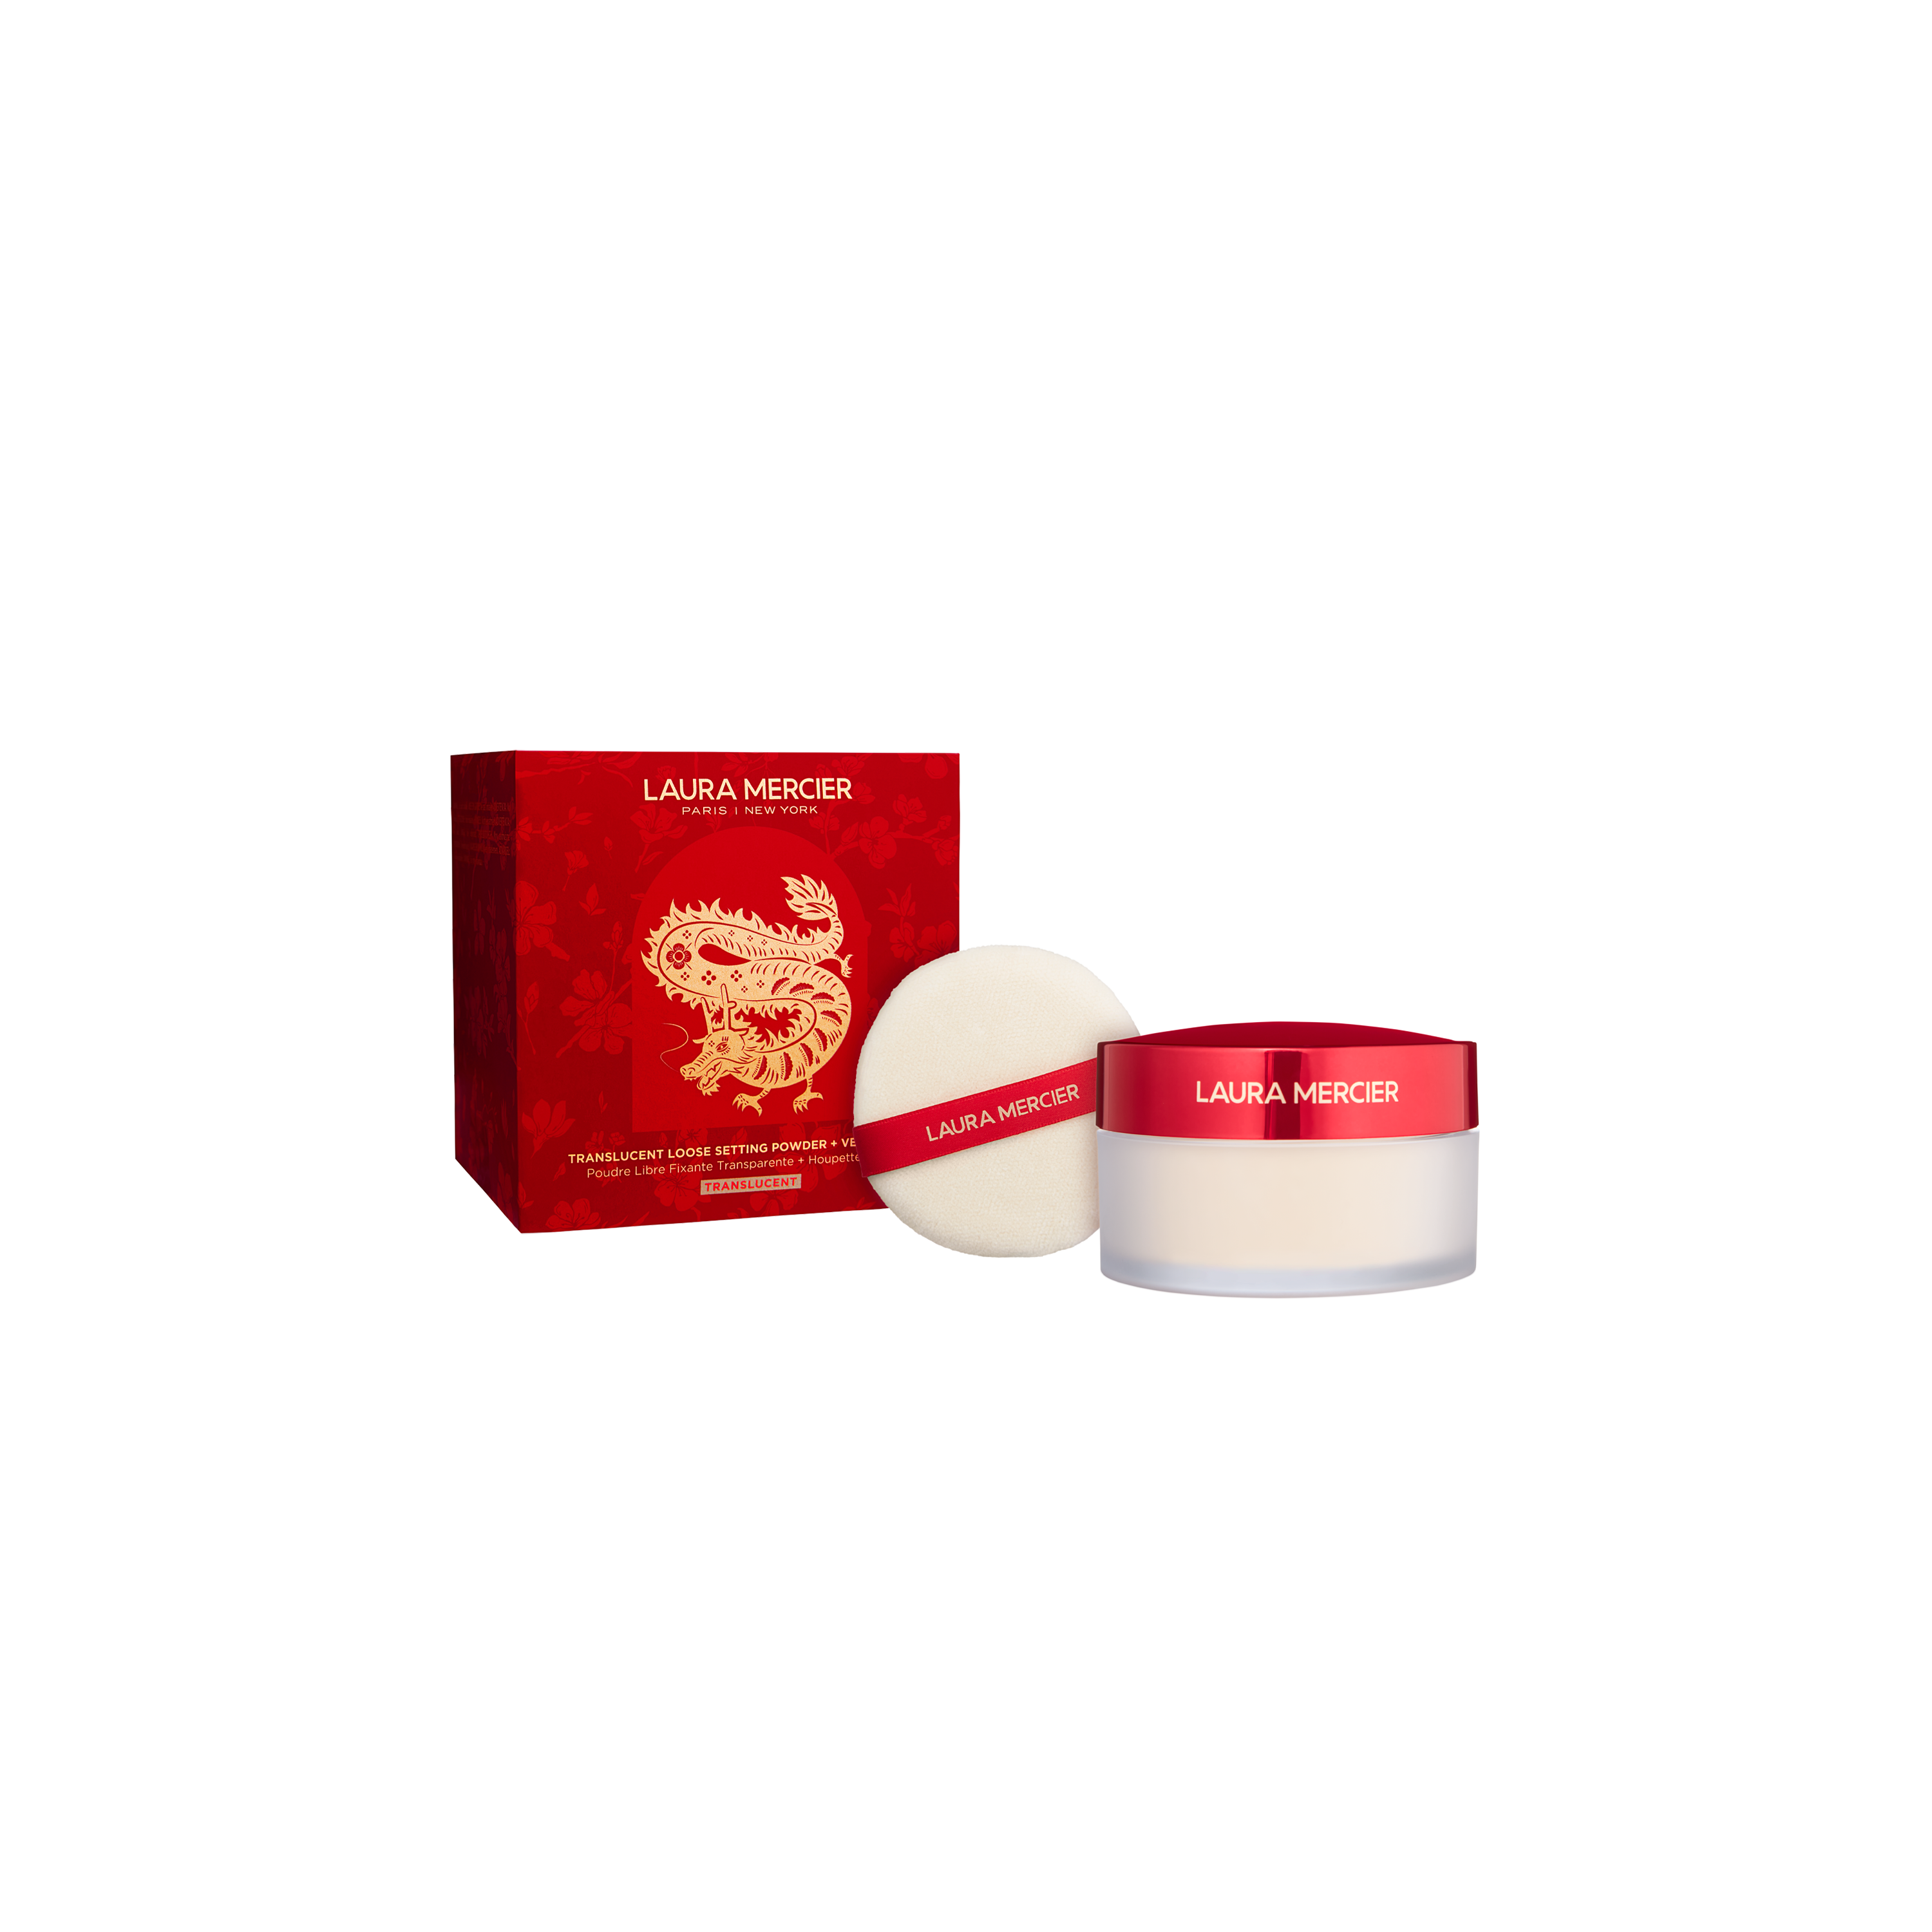 Lunar New Year Translucent Loose Setting Powder & Velour Puff Set Limited Edition View 1